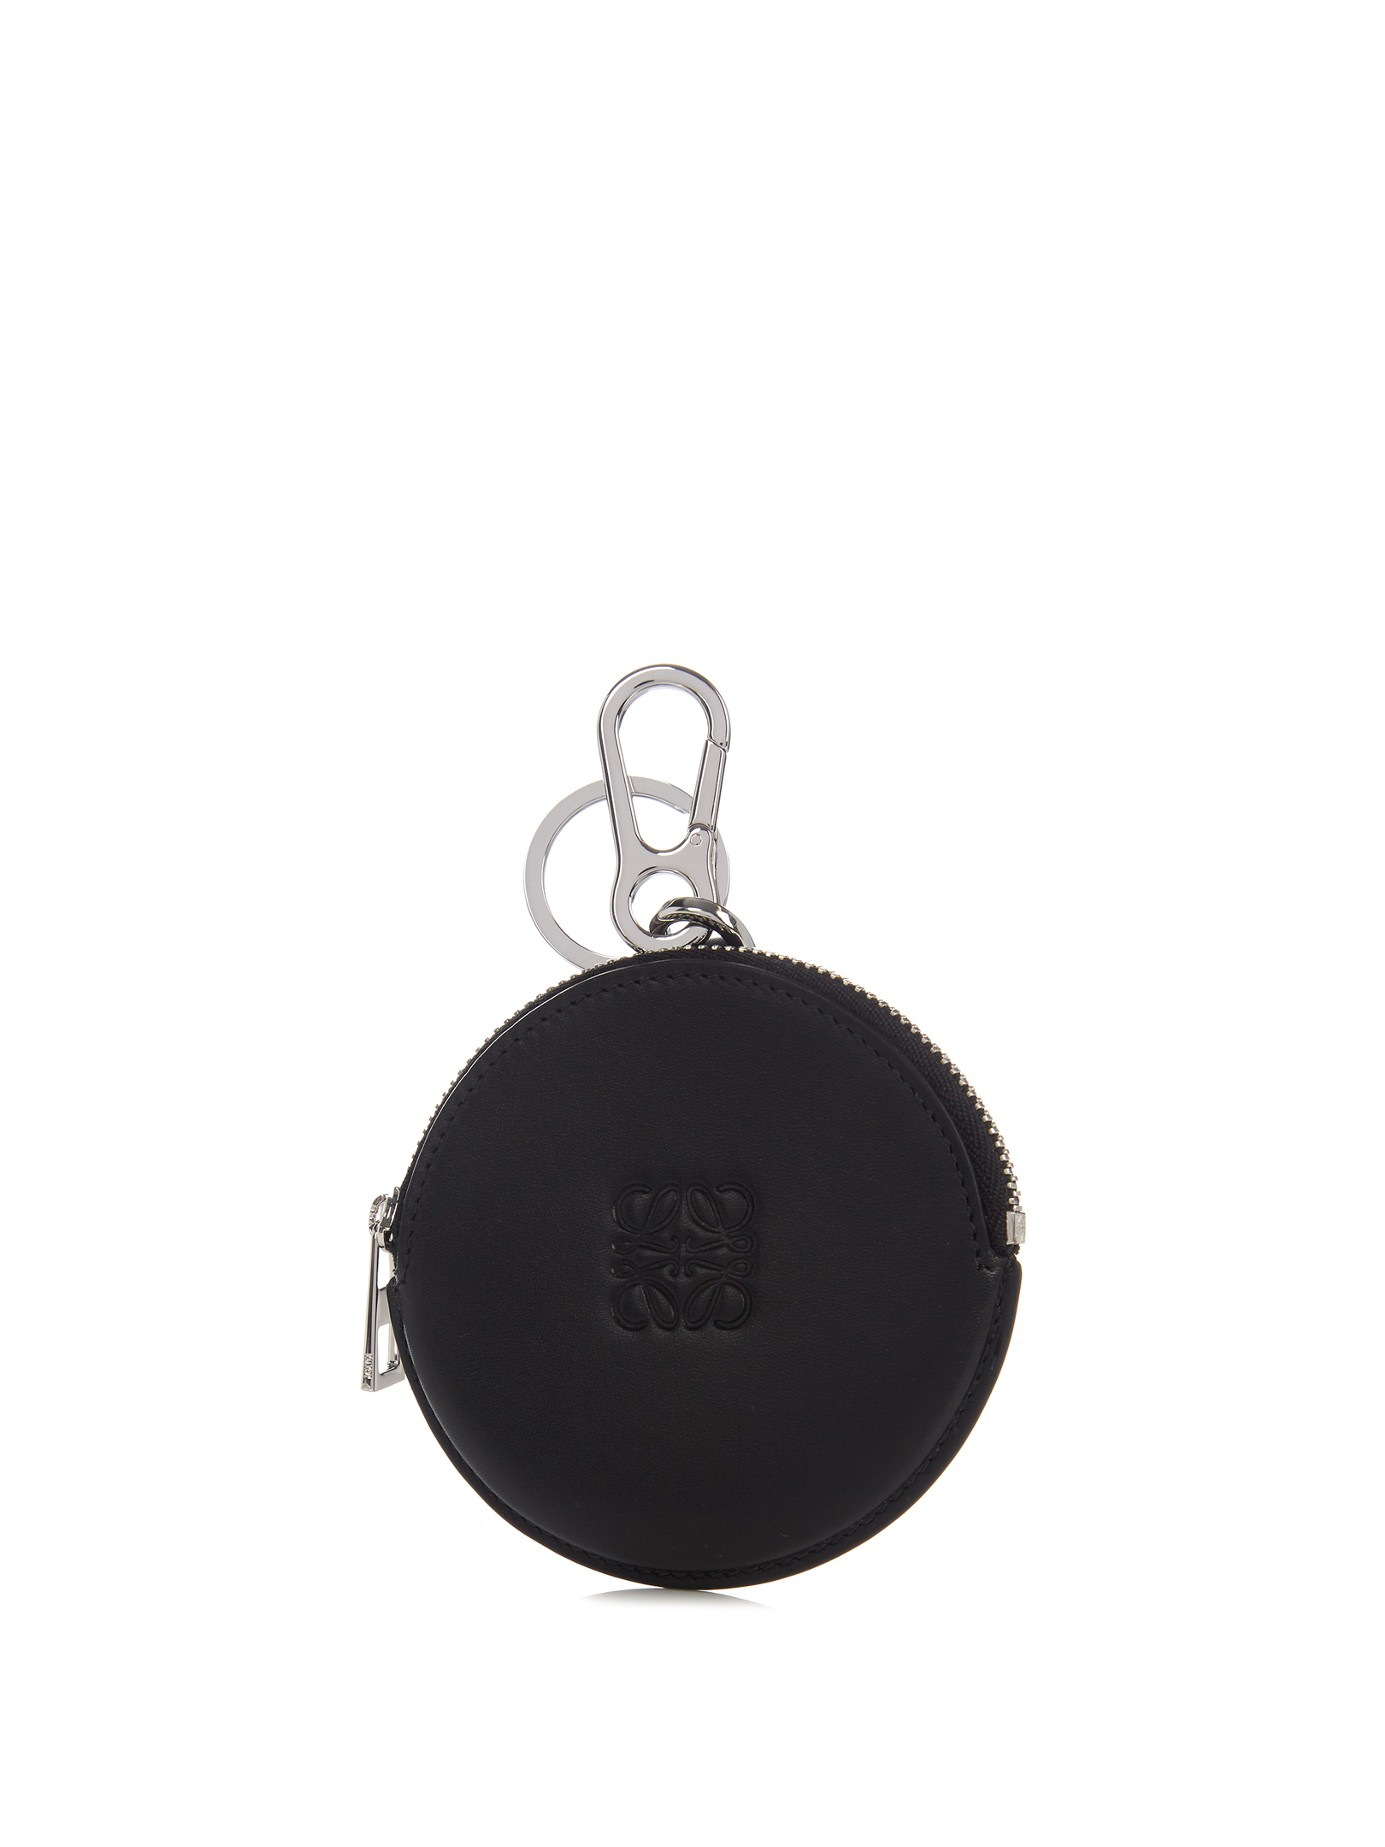 Loewe Round Leather Coin Purse Key Ring in Black - Lyst